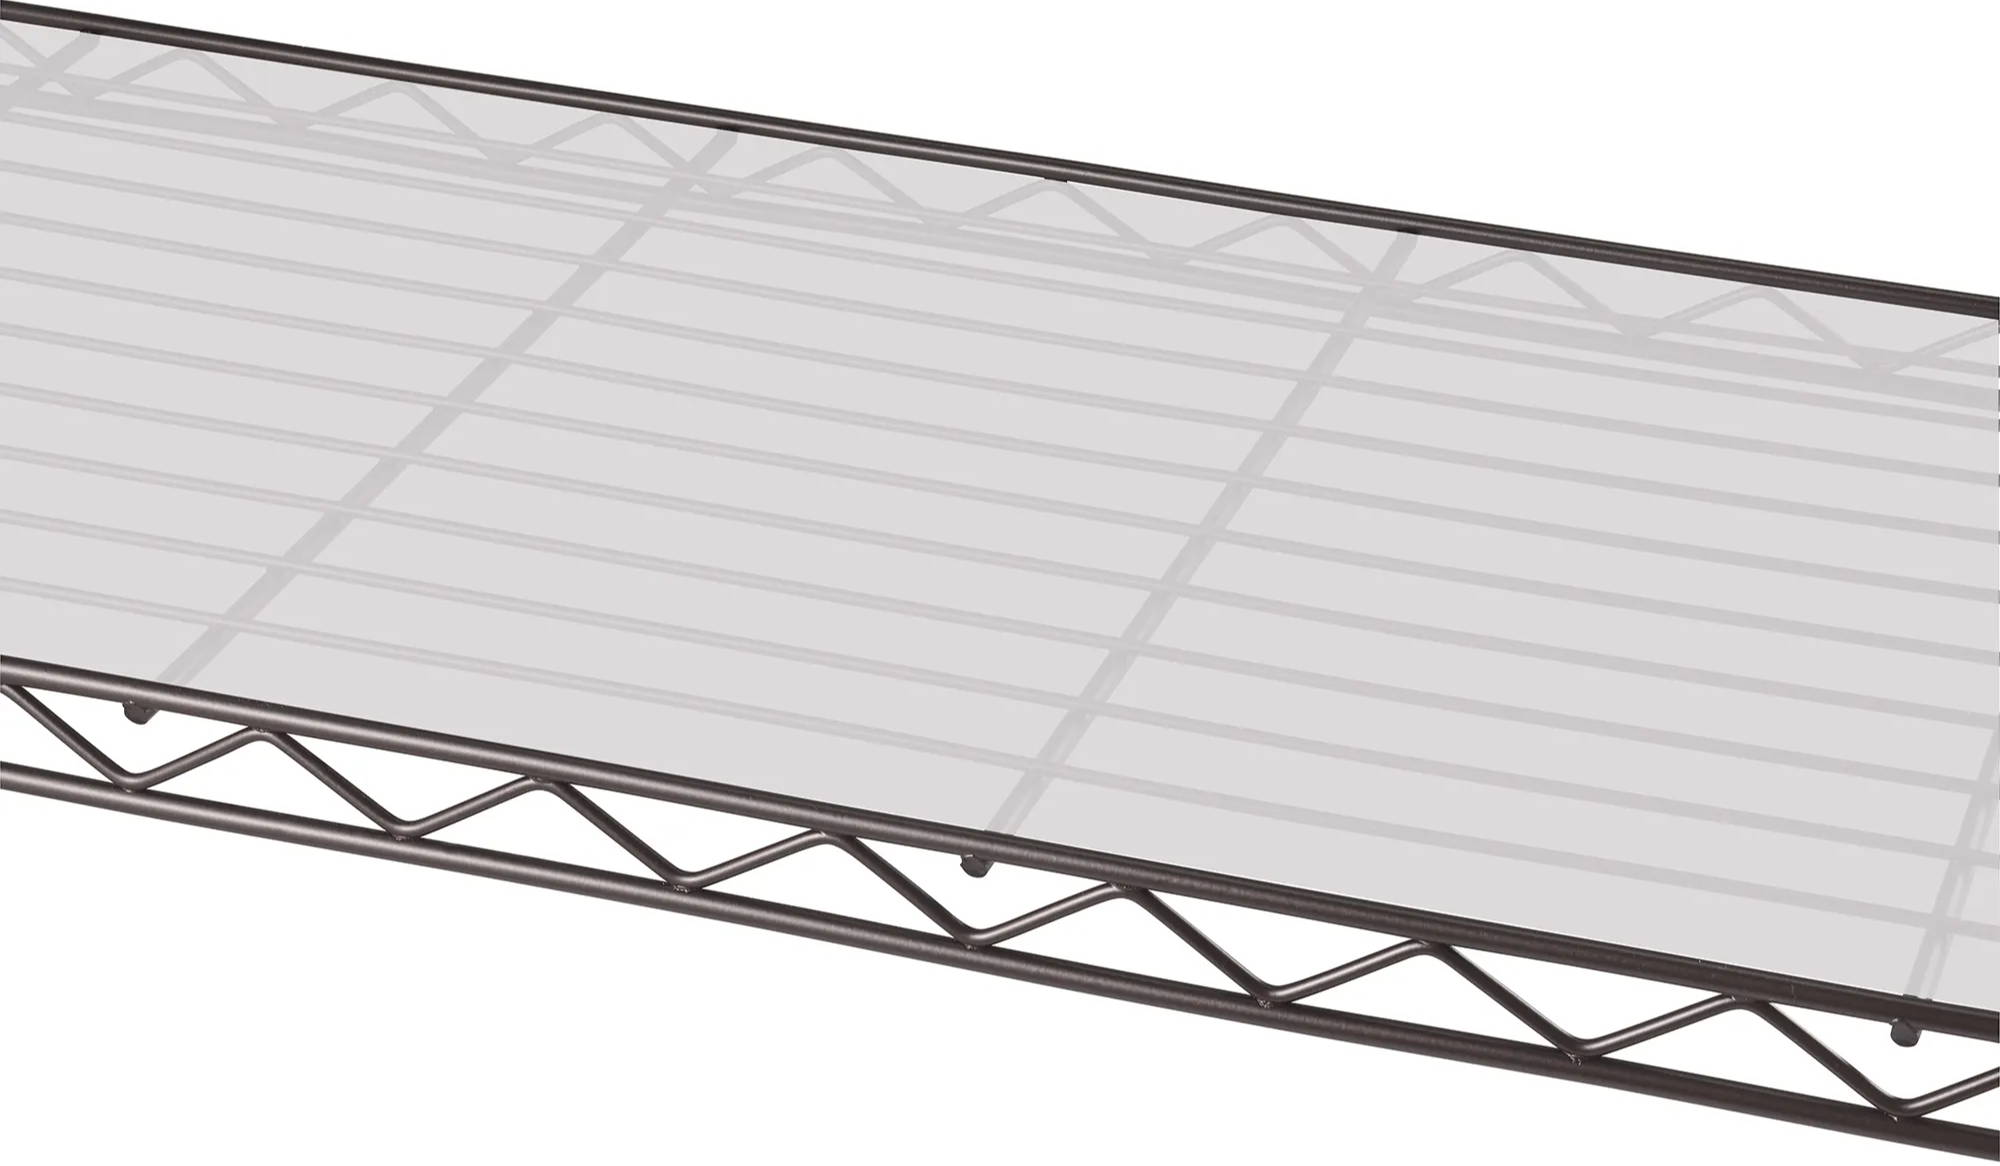 48 W x 18 D Shelf Liners for Wire Shelving in Clear Plastic